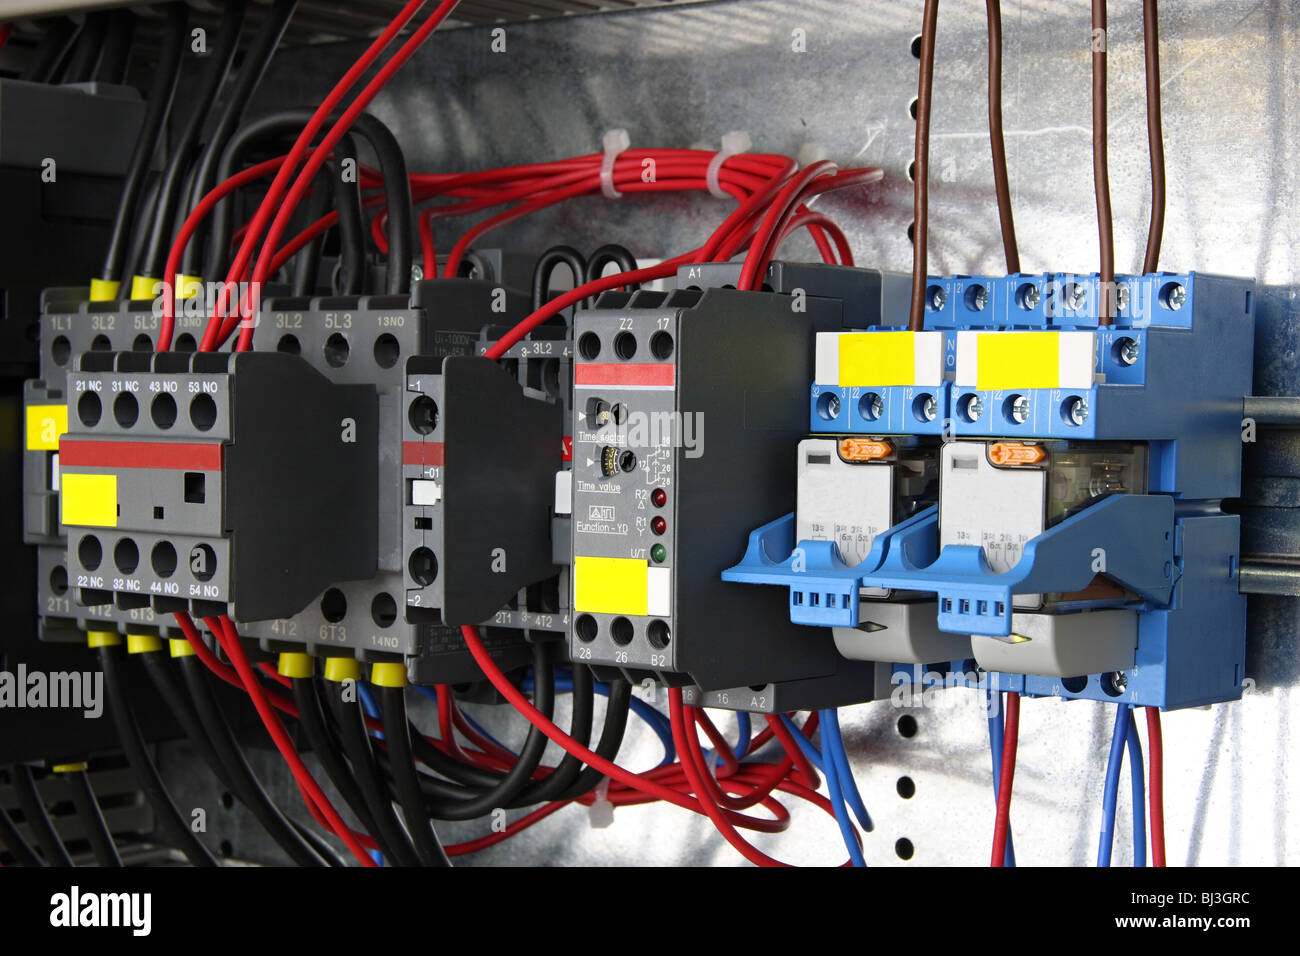 New control panel with static energy meters and circuit-breakers Stock Photo